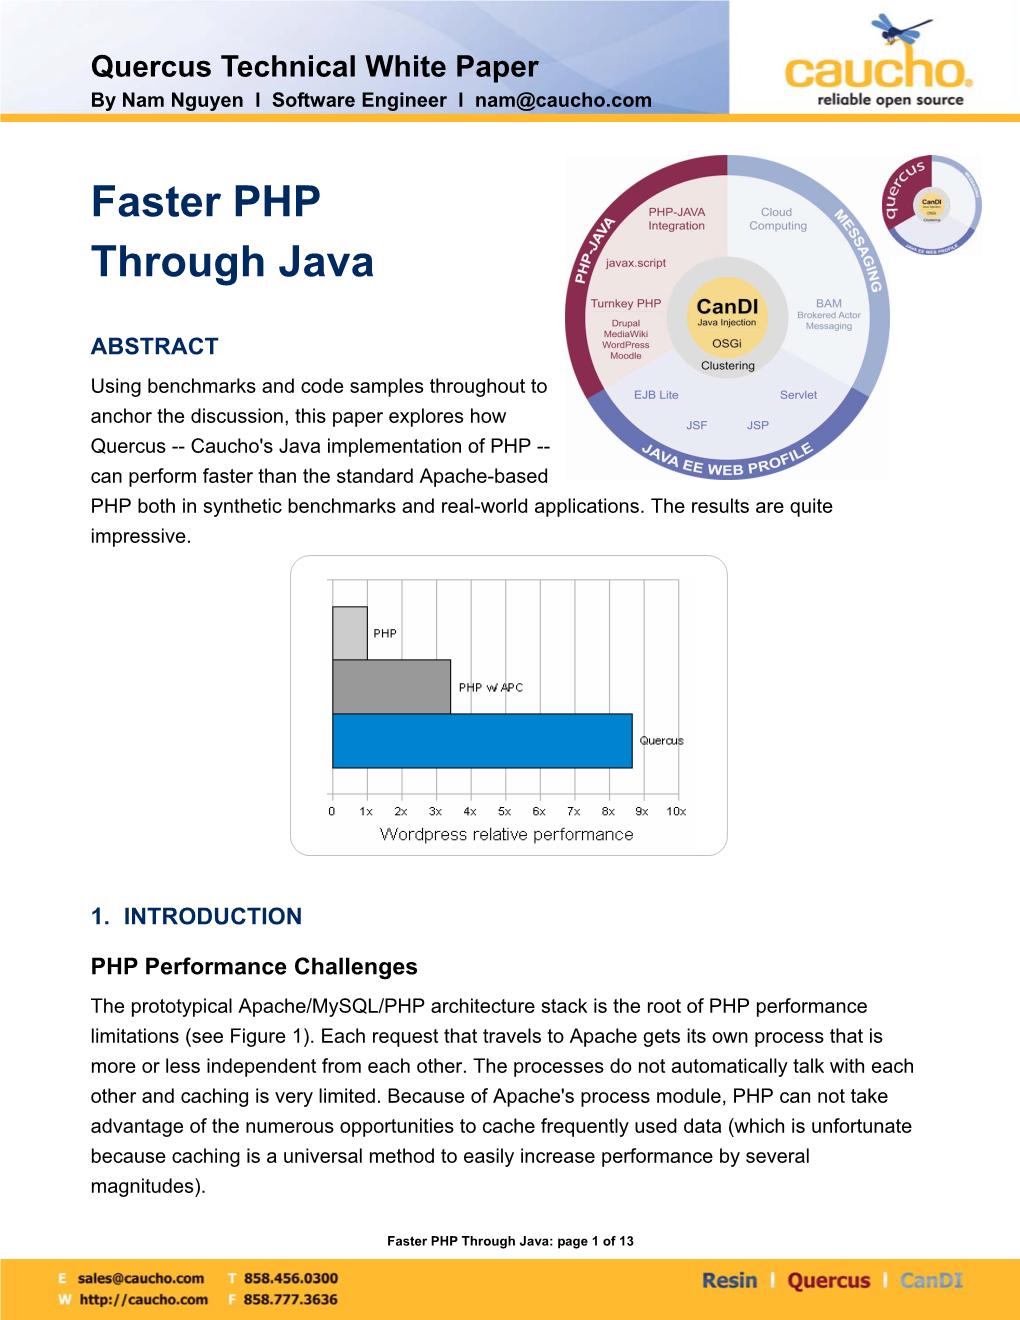 Faster PHP Through Java